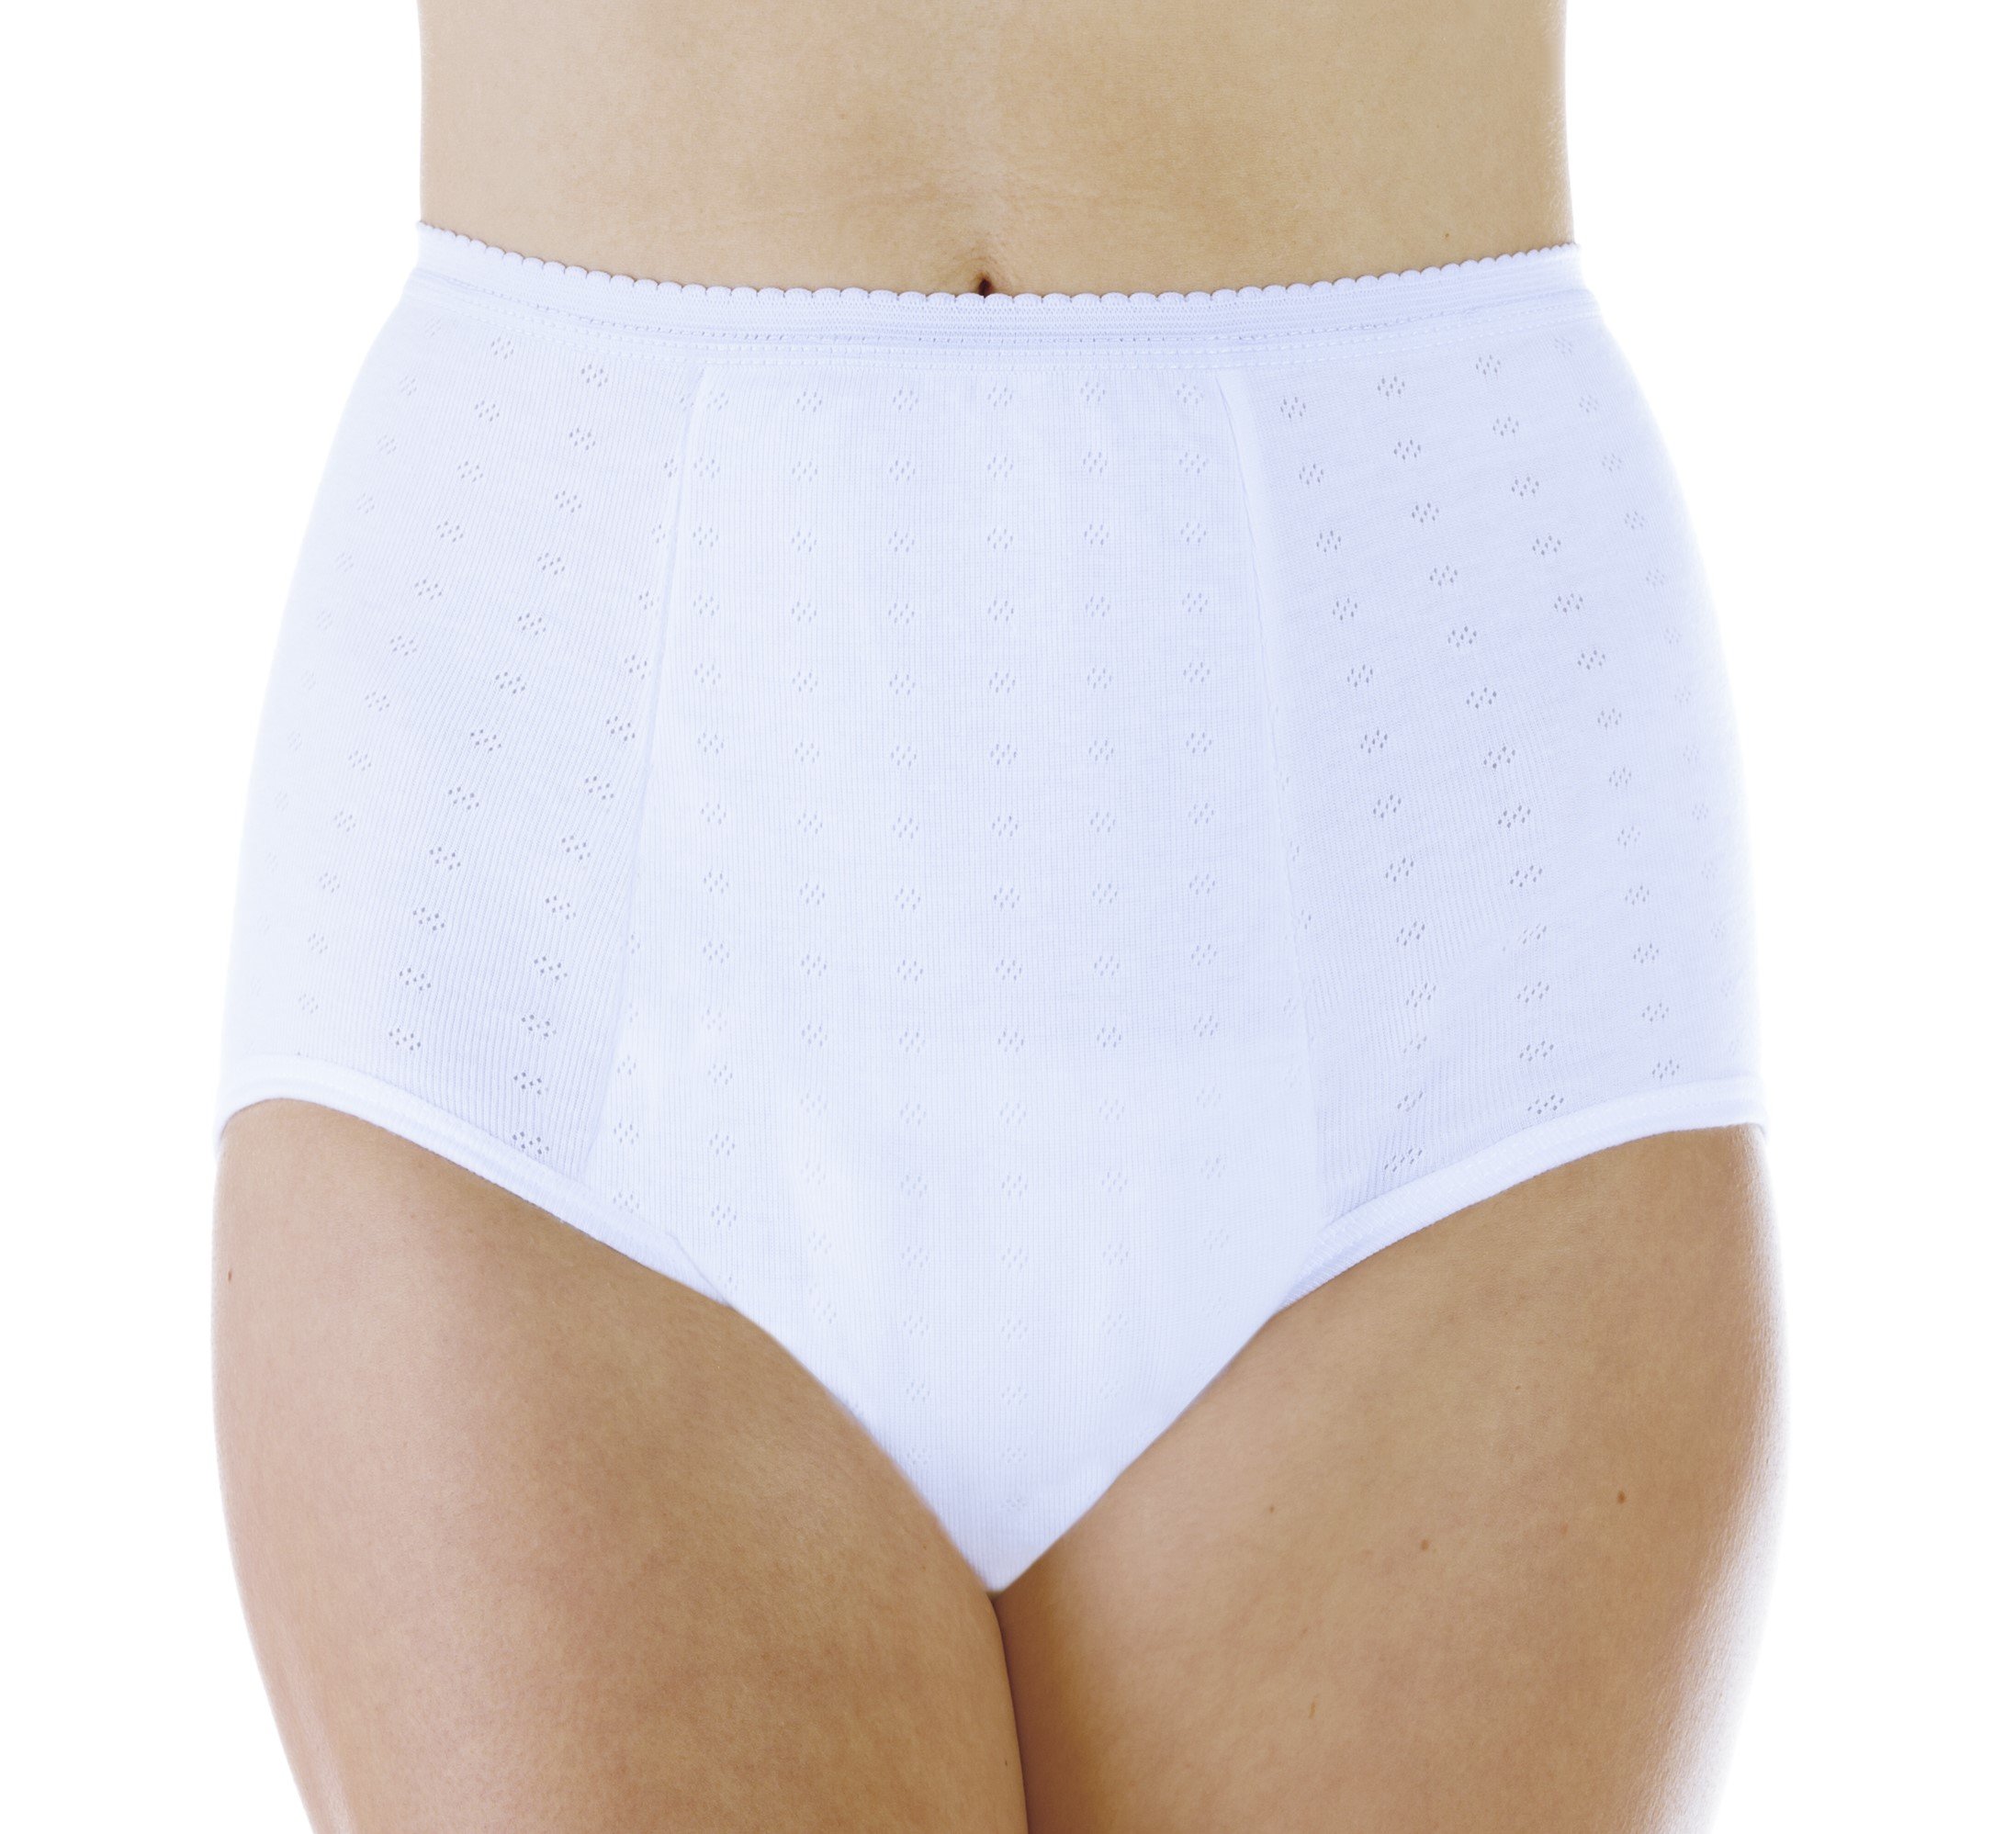 The effectiveness of supportive underwear in women with pelvic